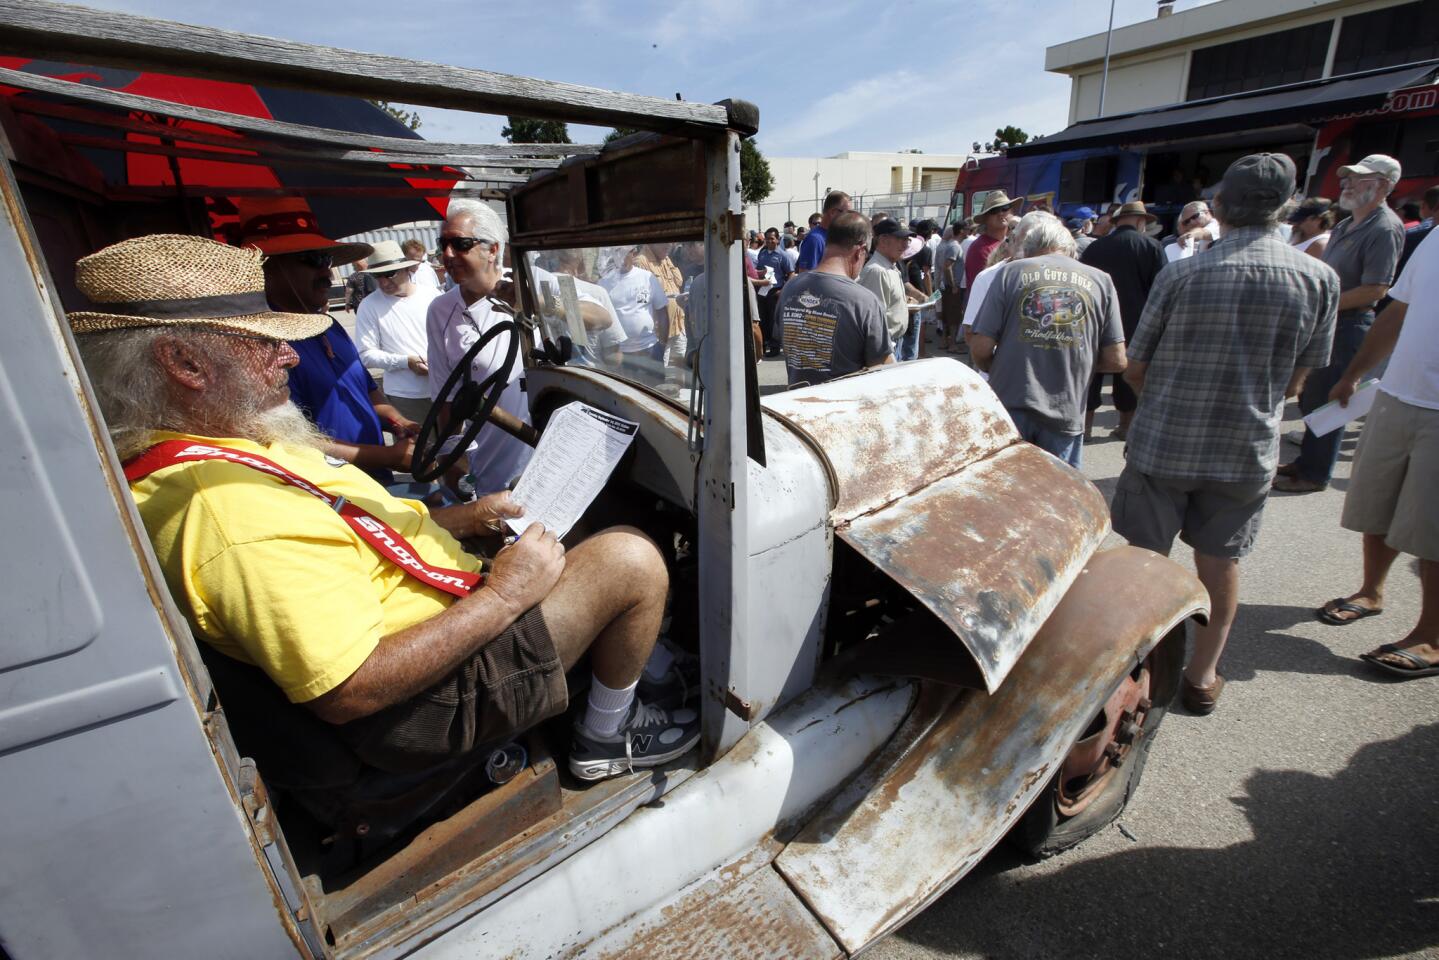 Old cars up for auction